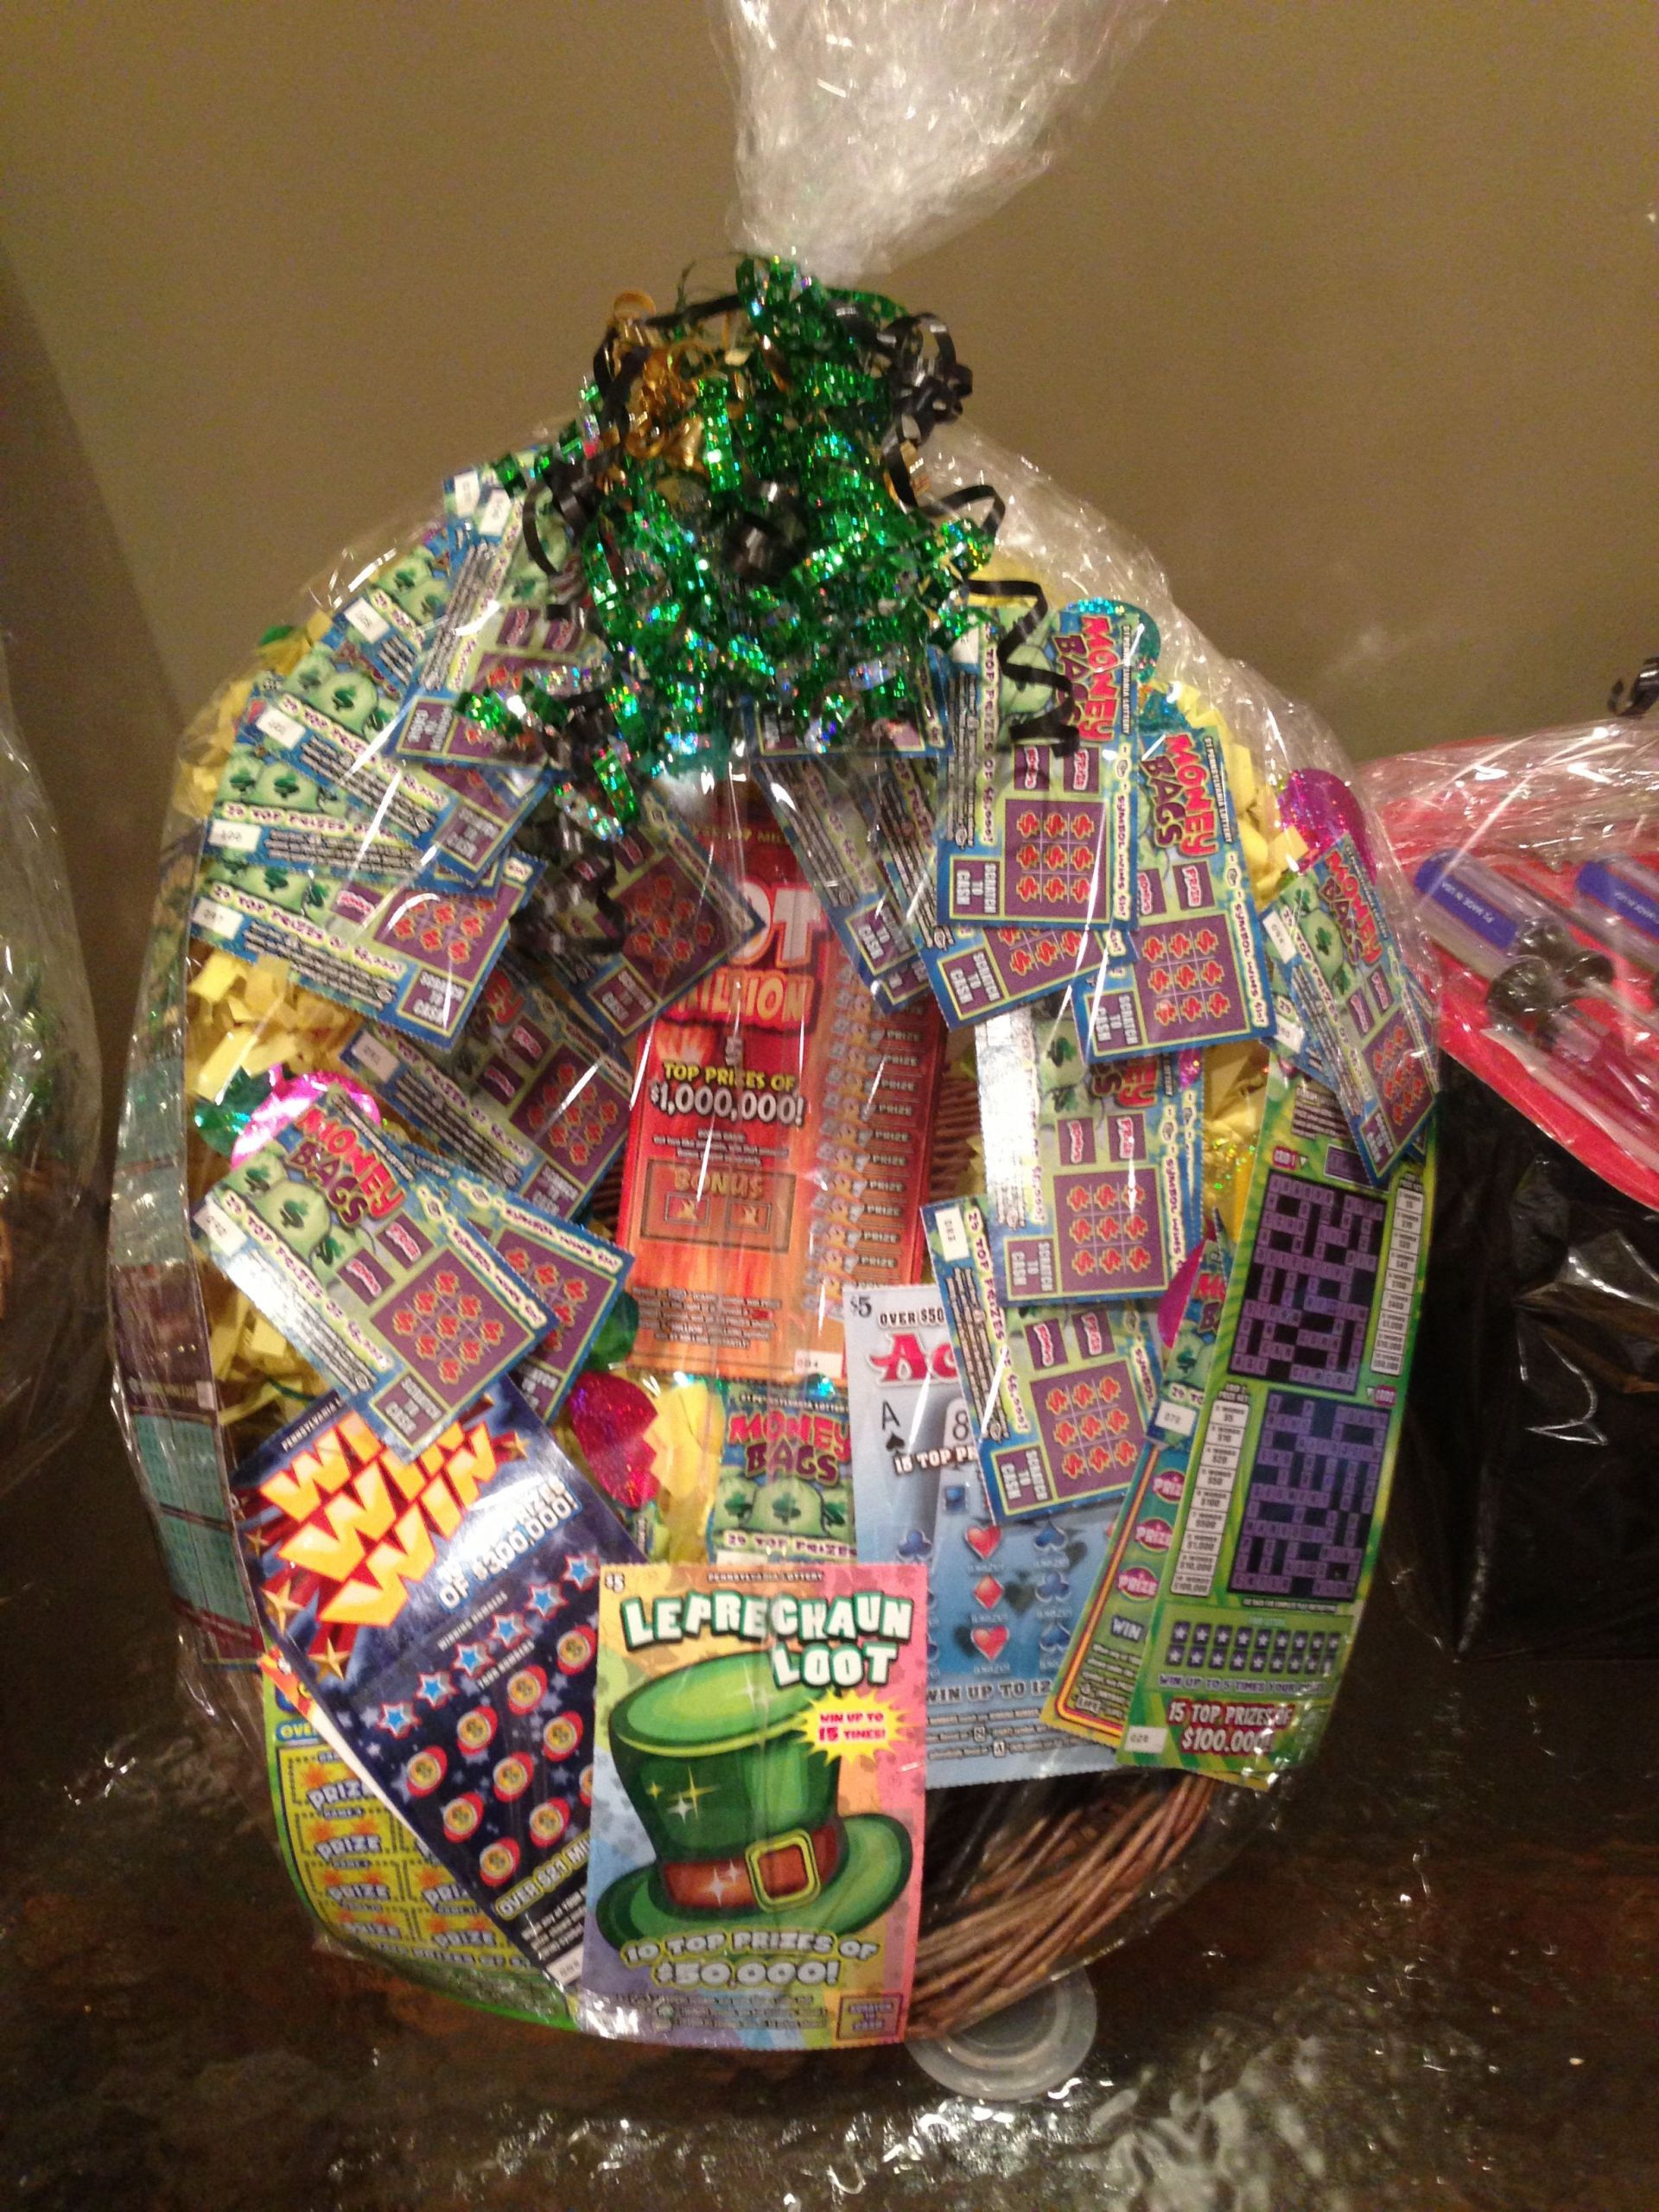 The 22 Best Ideas for Ideas for Raffle Gift Baskets Home, Family